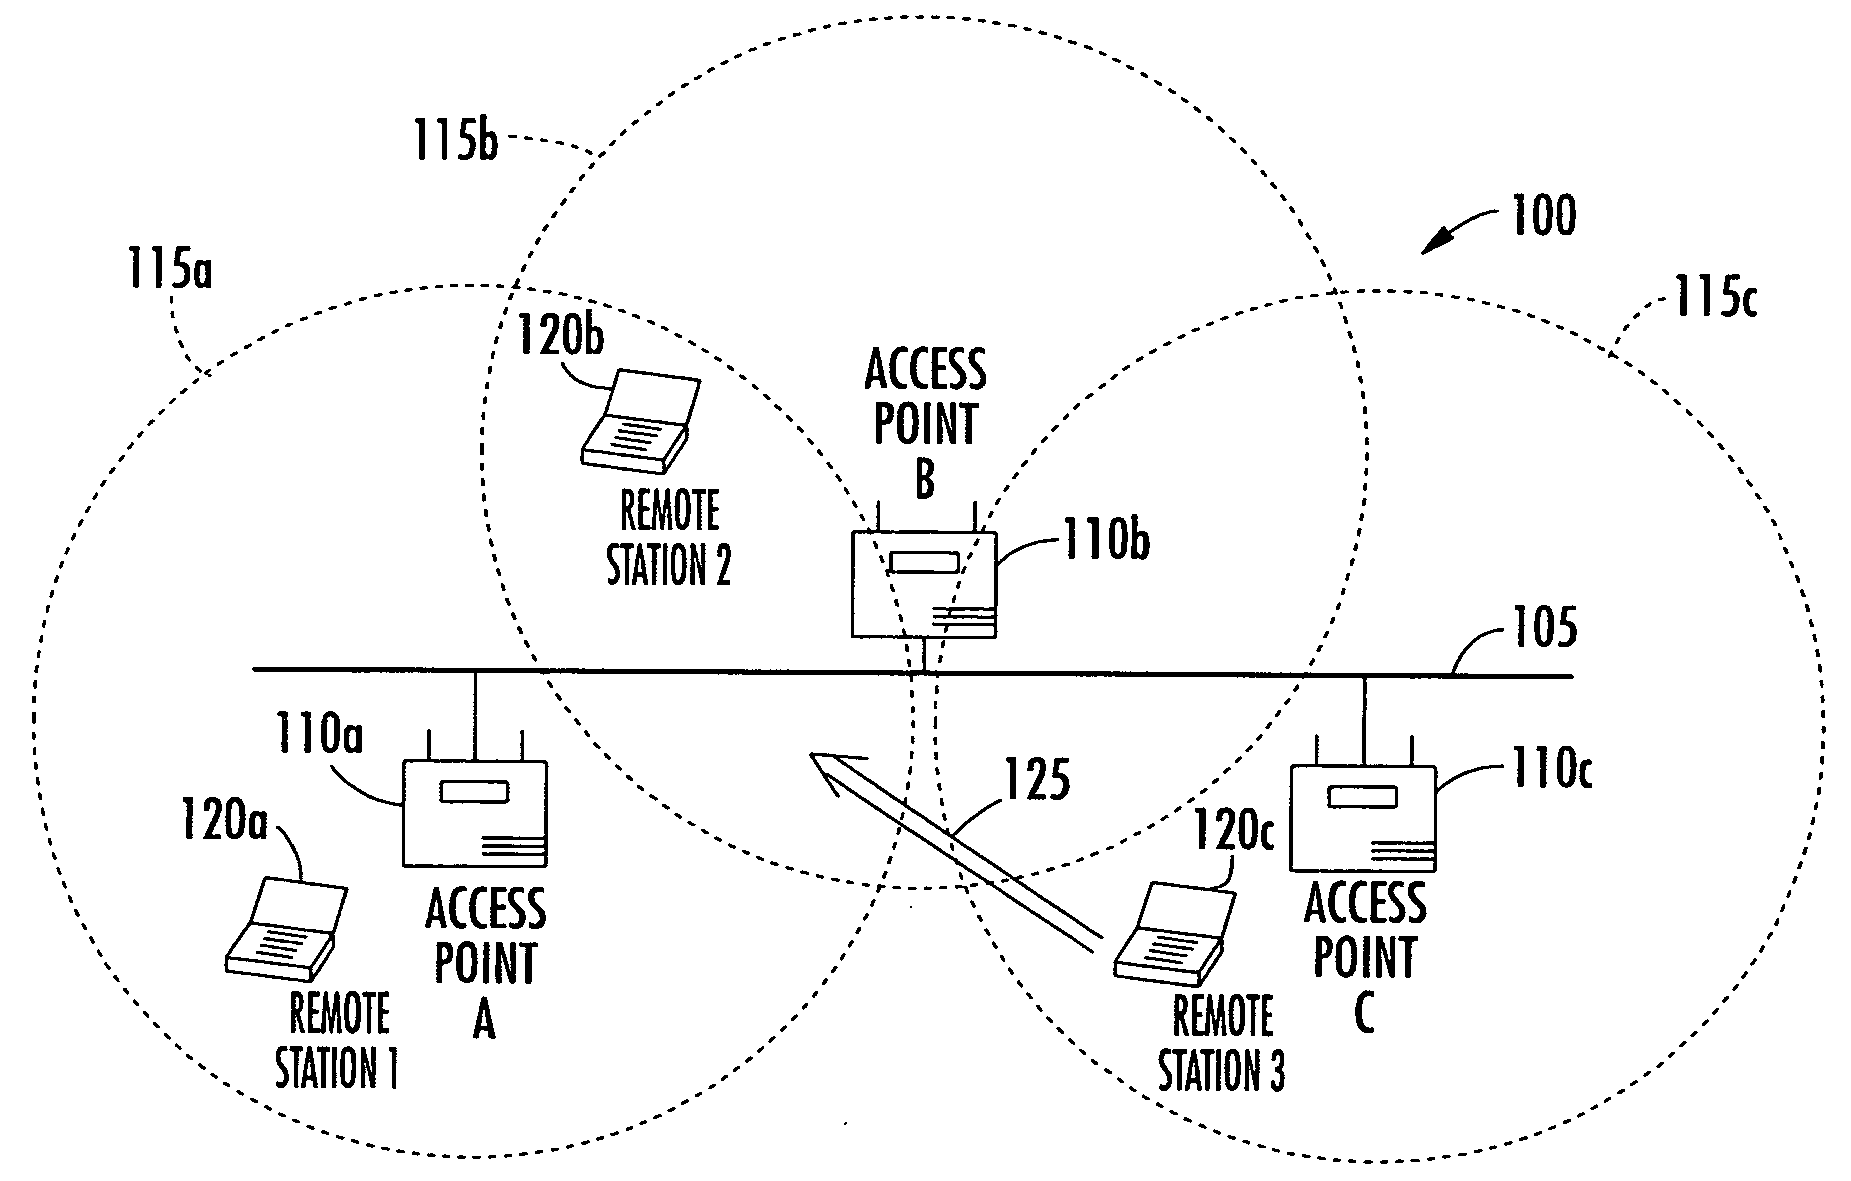 Antenna steering and hidden node recognition for an access point